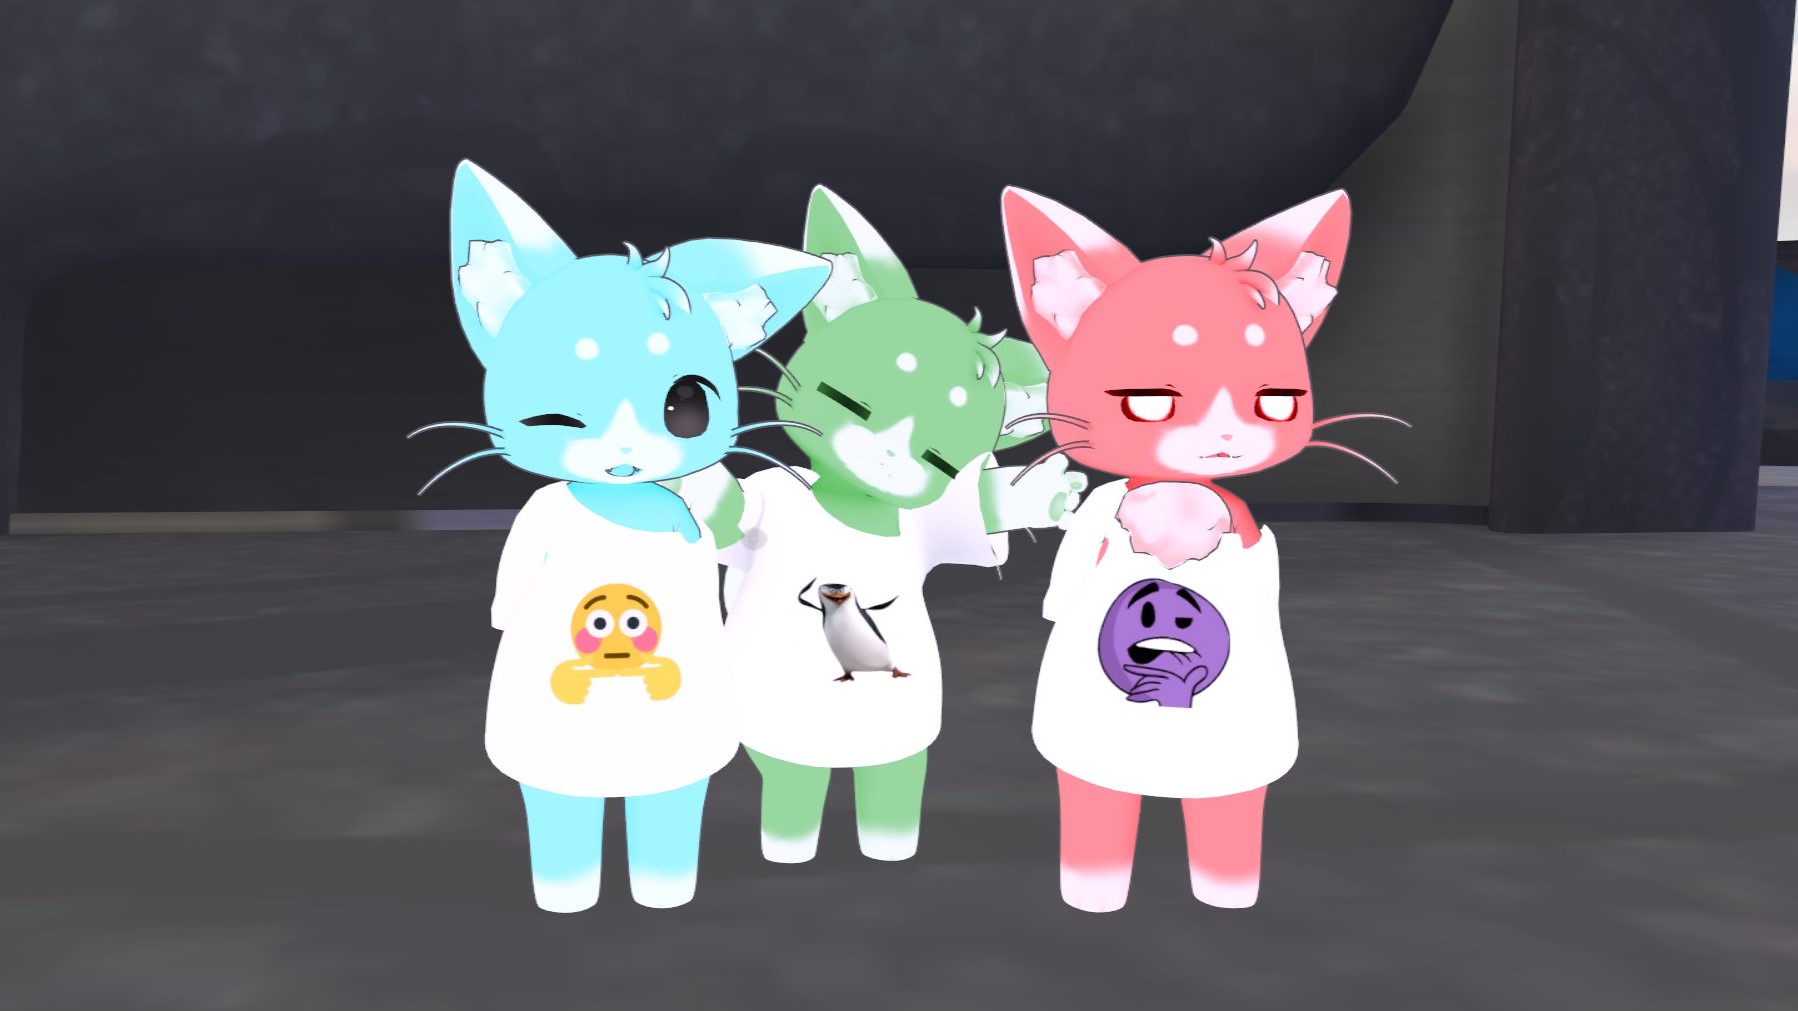 VRChat cat: Delve into a world of feline fantasy, join the conversation and strut your stuff as a VRChat Cat, where no two will ever look alike. This is your chance to unleash your creative side and let out your inner feline in the mind-bending world of VR.